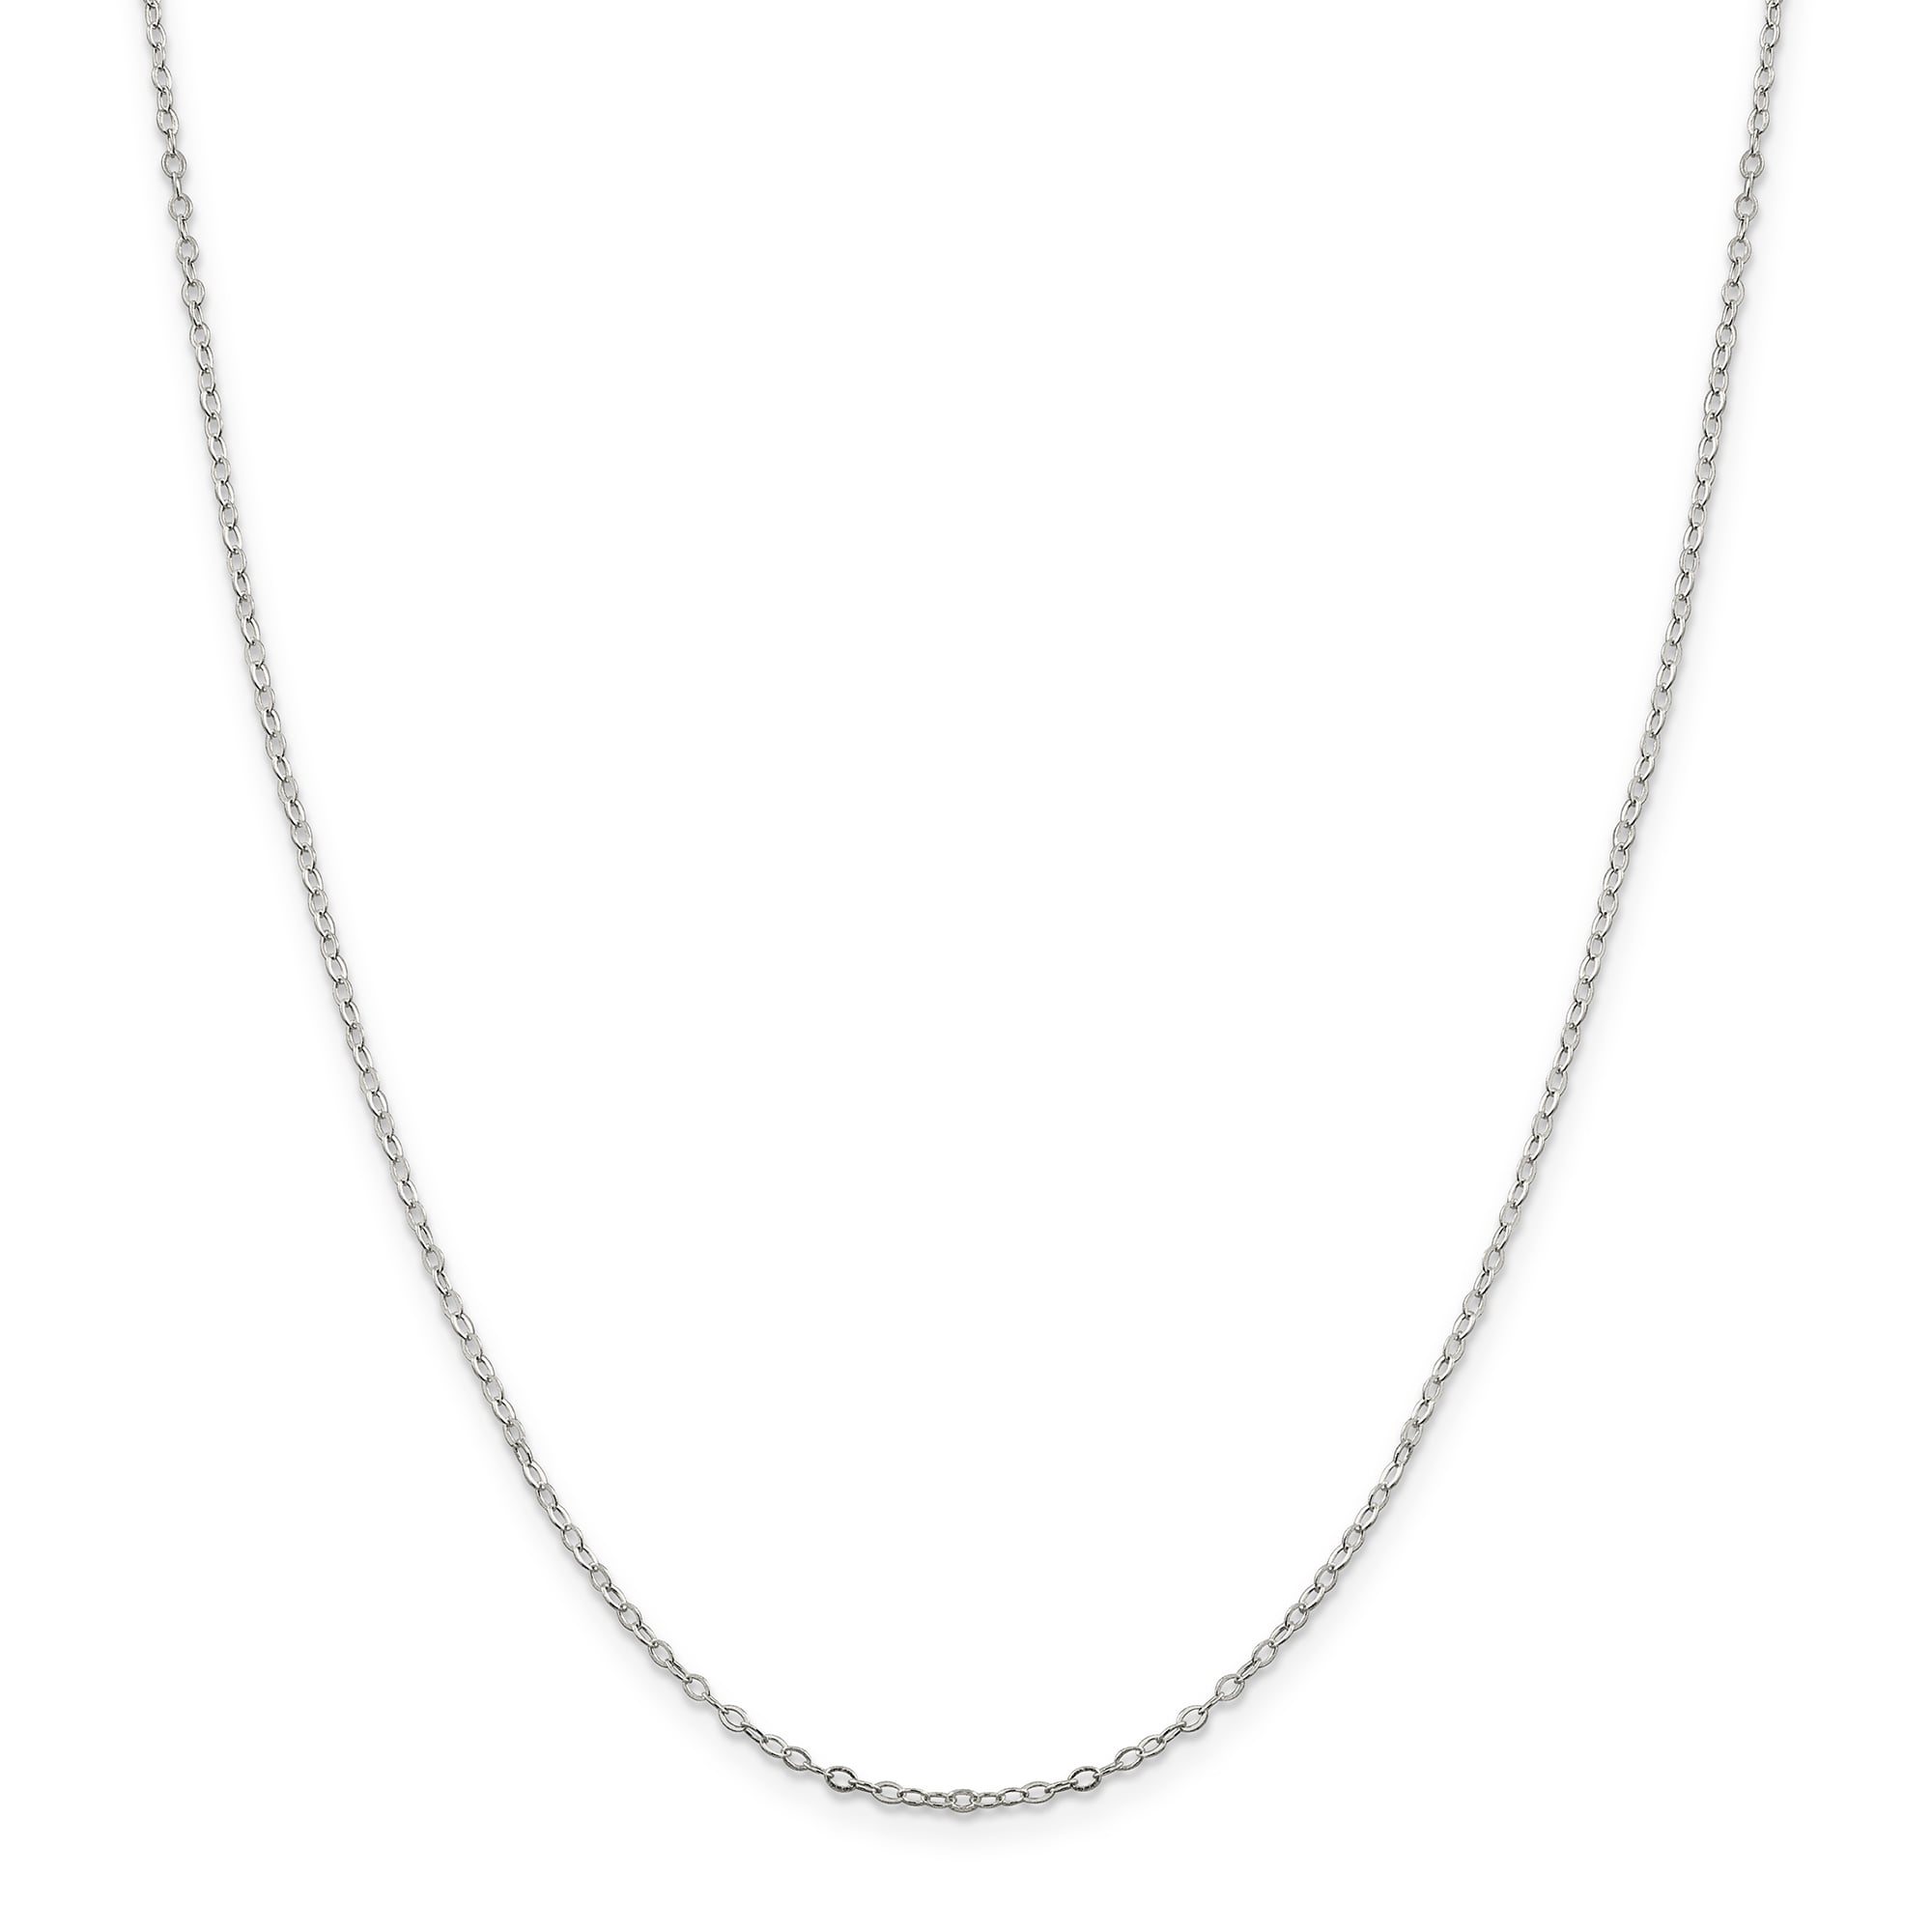 Everyday Circle Necklace .925 Sterling Silver Waterproof Nickel Free Dainty Necklace Silver